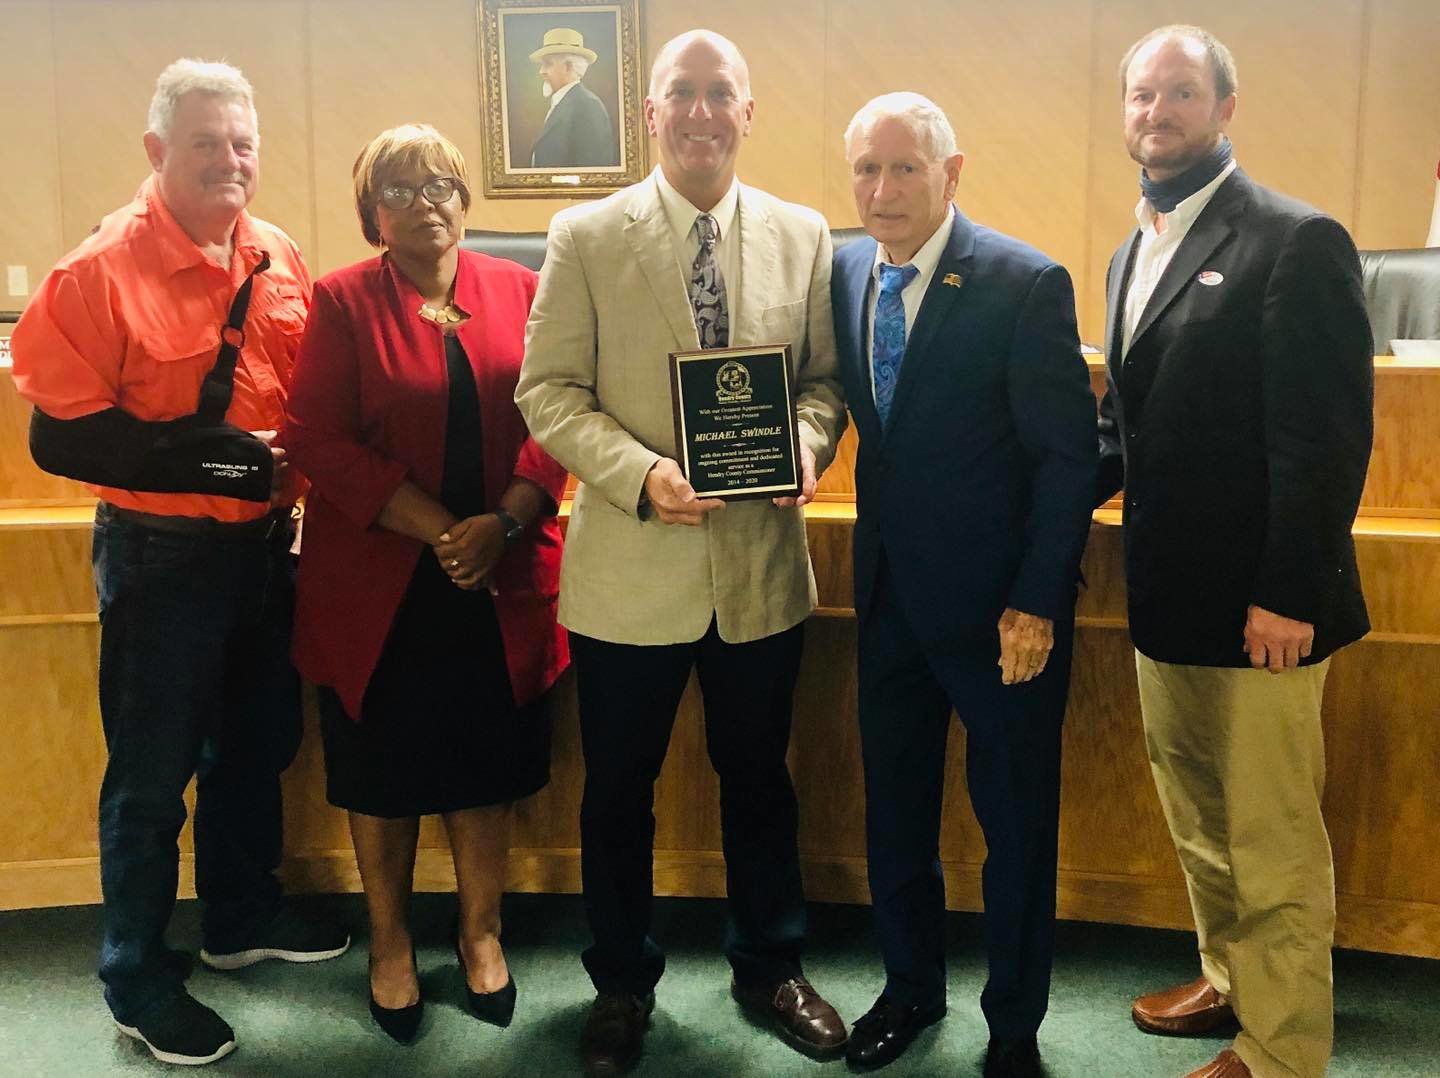 The Hendry County commission honored Commissioner Michael Swindle during his final board meeting on October 27.